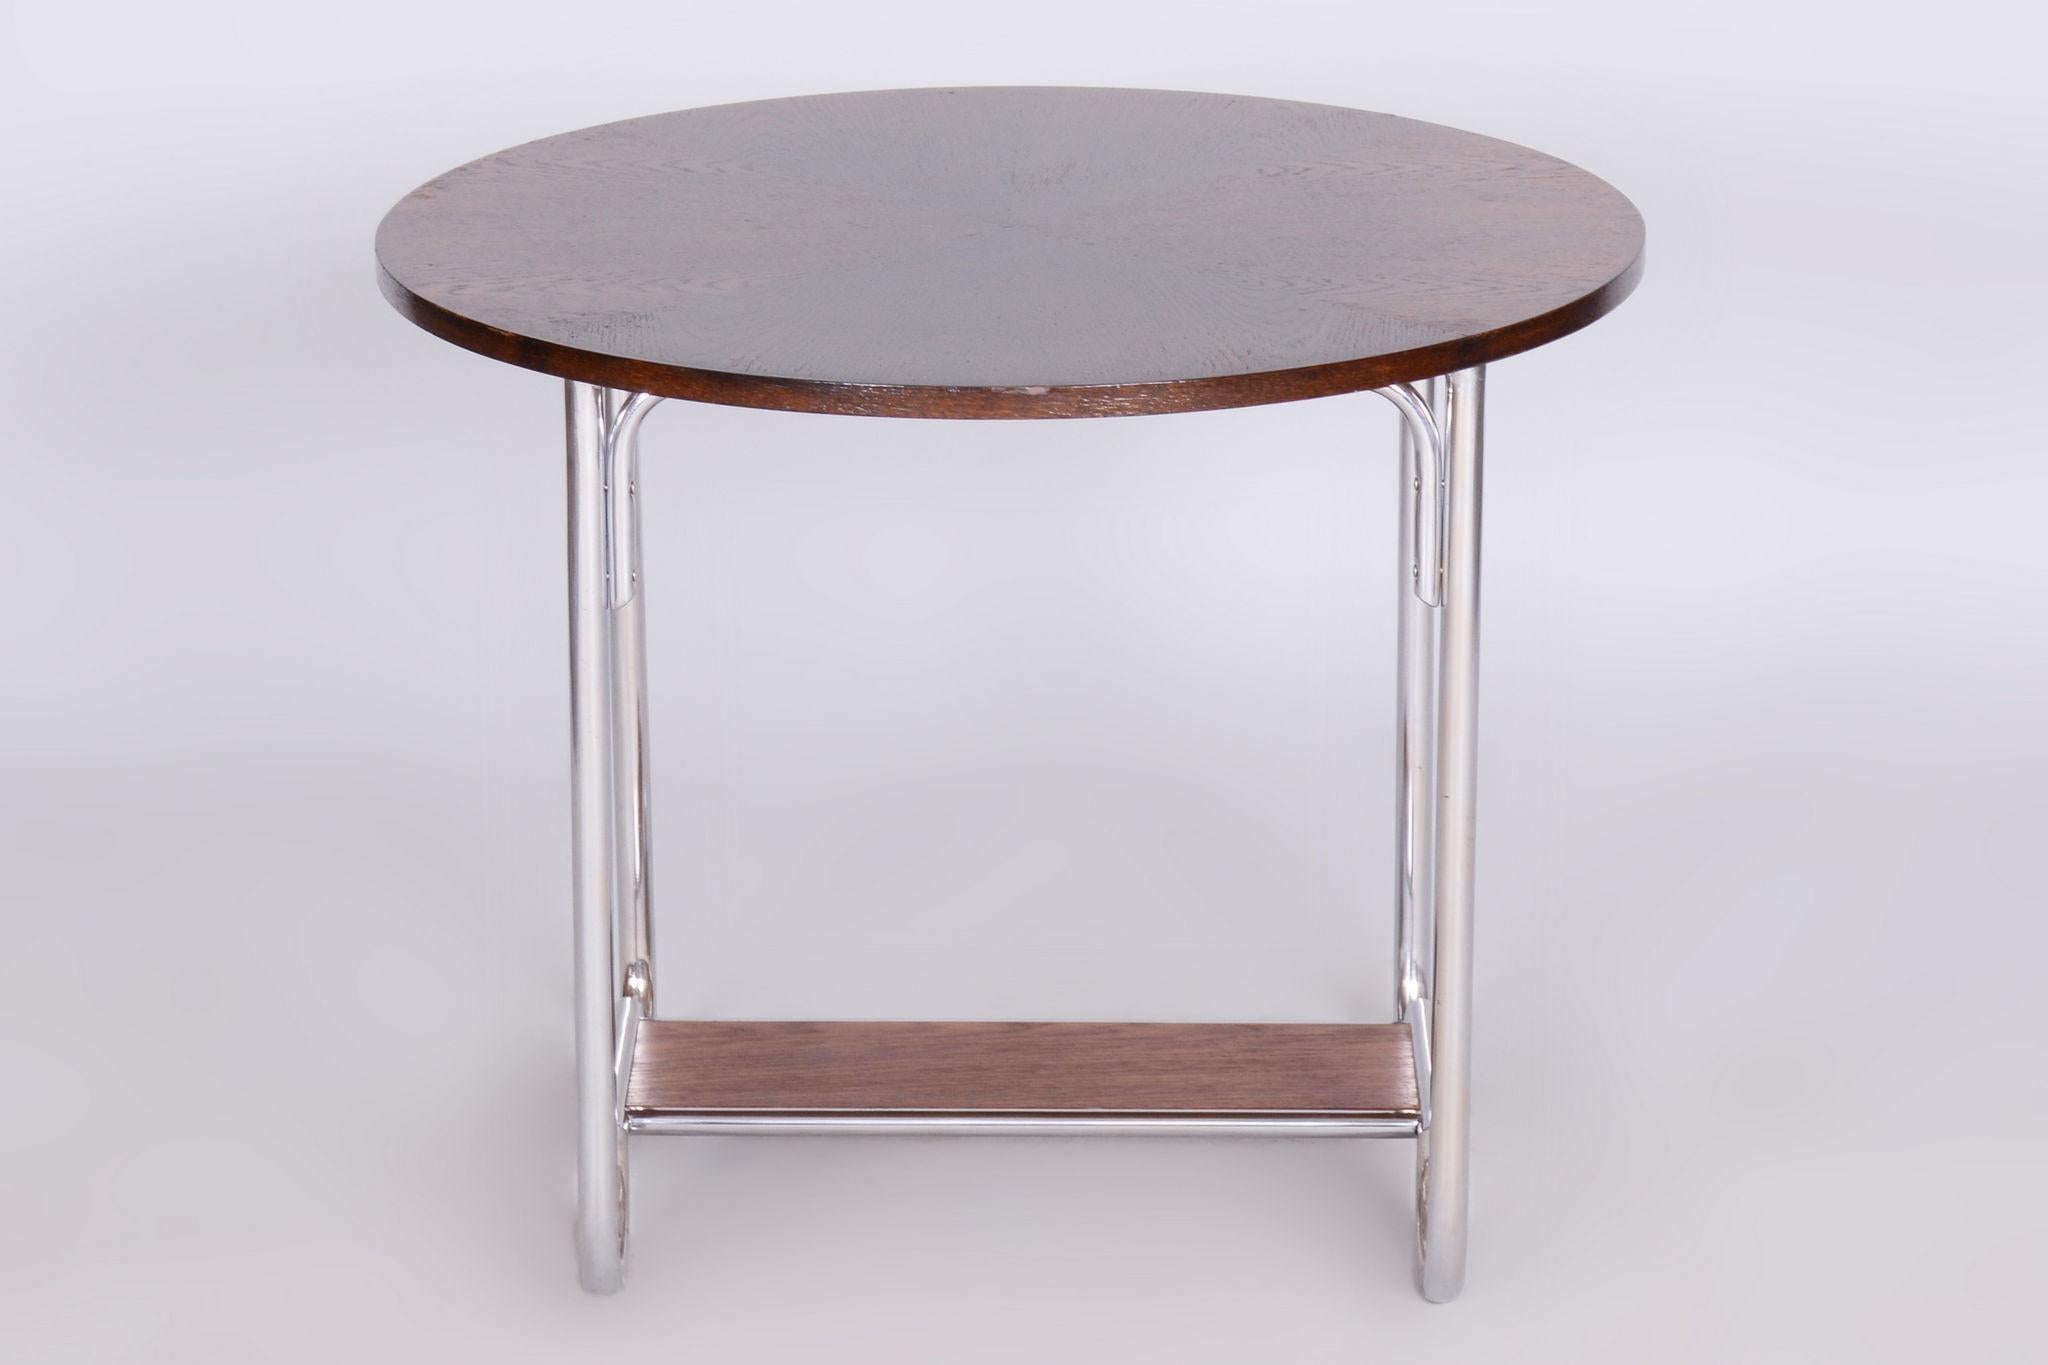 Restored Bauhaus Oak Small Round Table, Chrome-Plated Steel, Czechia, 1930s For Sale 4